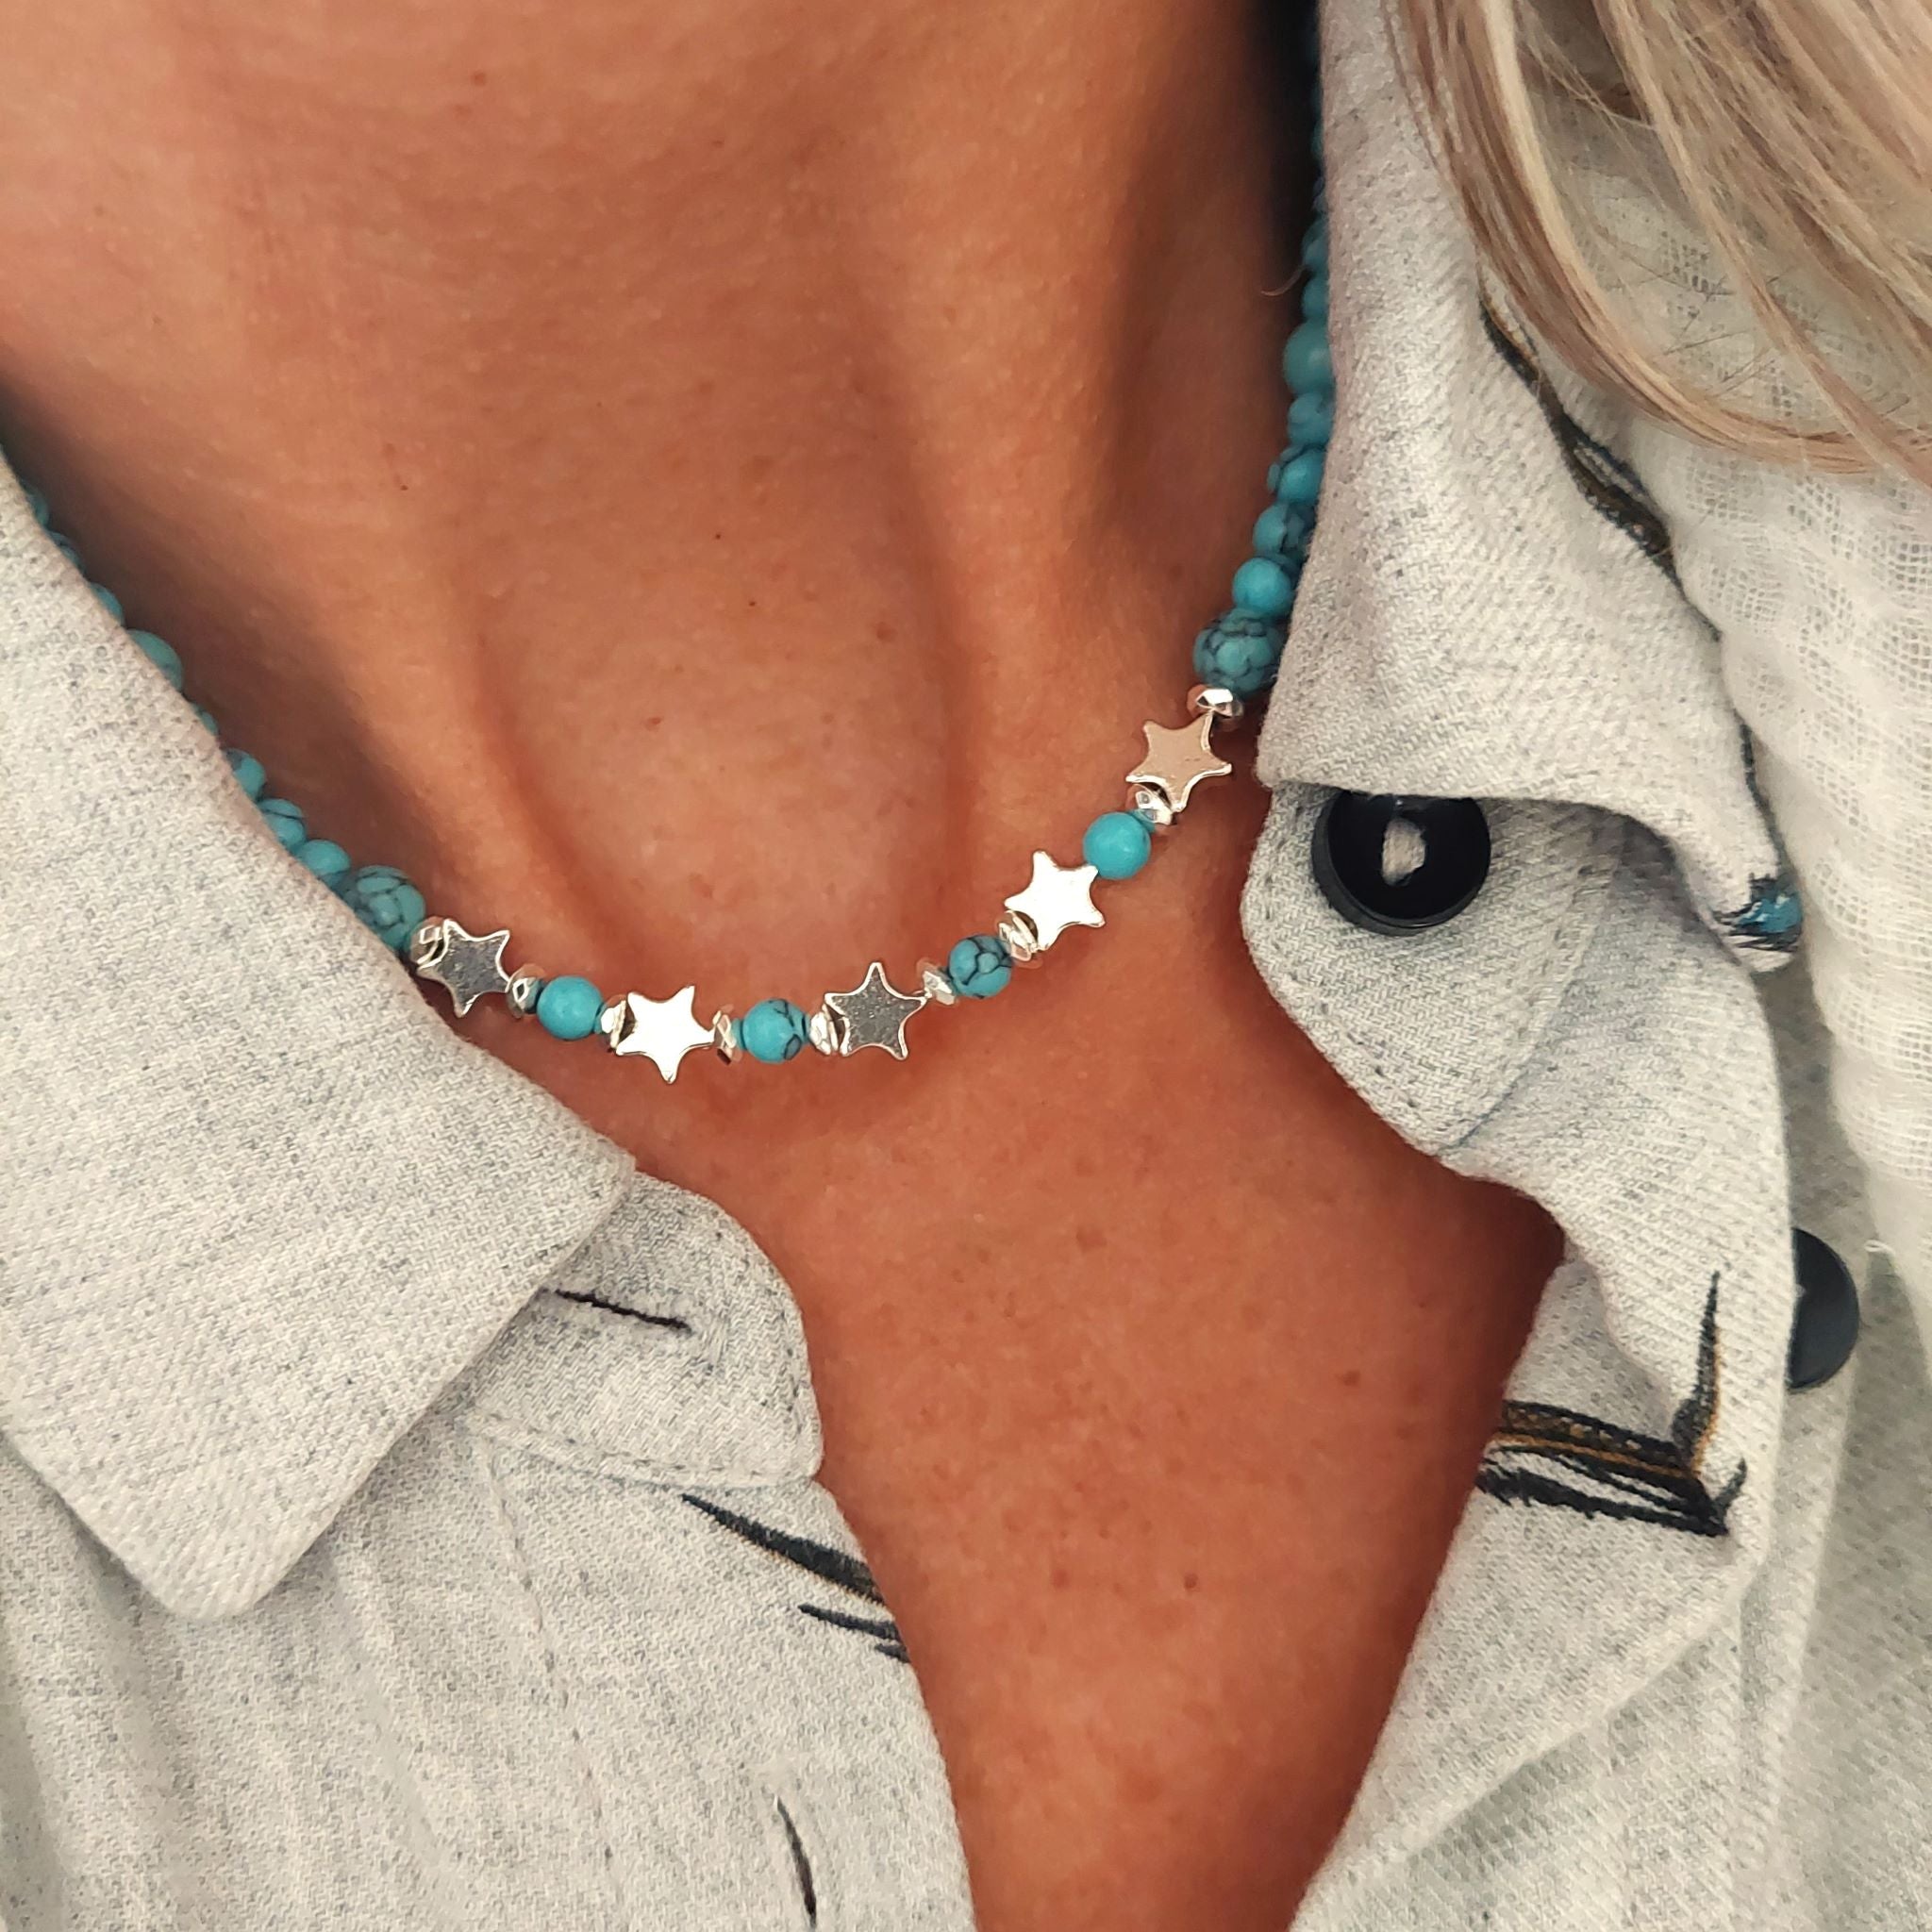 Lovely turquoise calcite beads with silver hematite discs & stars necklace  Silver plated fastenings & lobster clasp with silver (nickel free) star charm plus made with love heart  Length - 39cm with extension chain to 43cm  Perfect little gift for a friend!